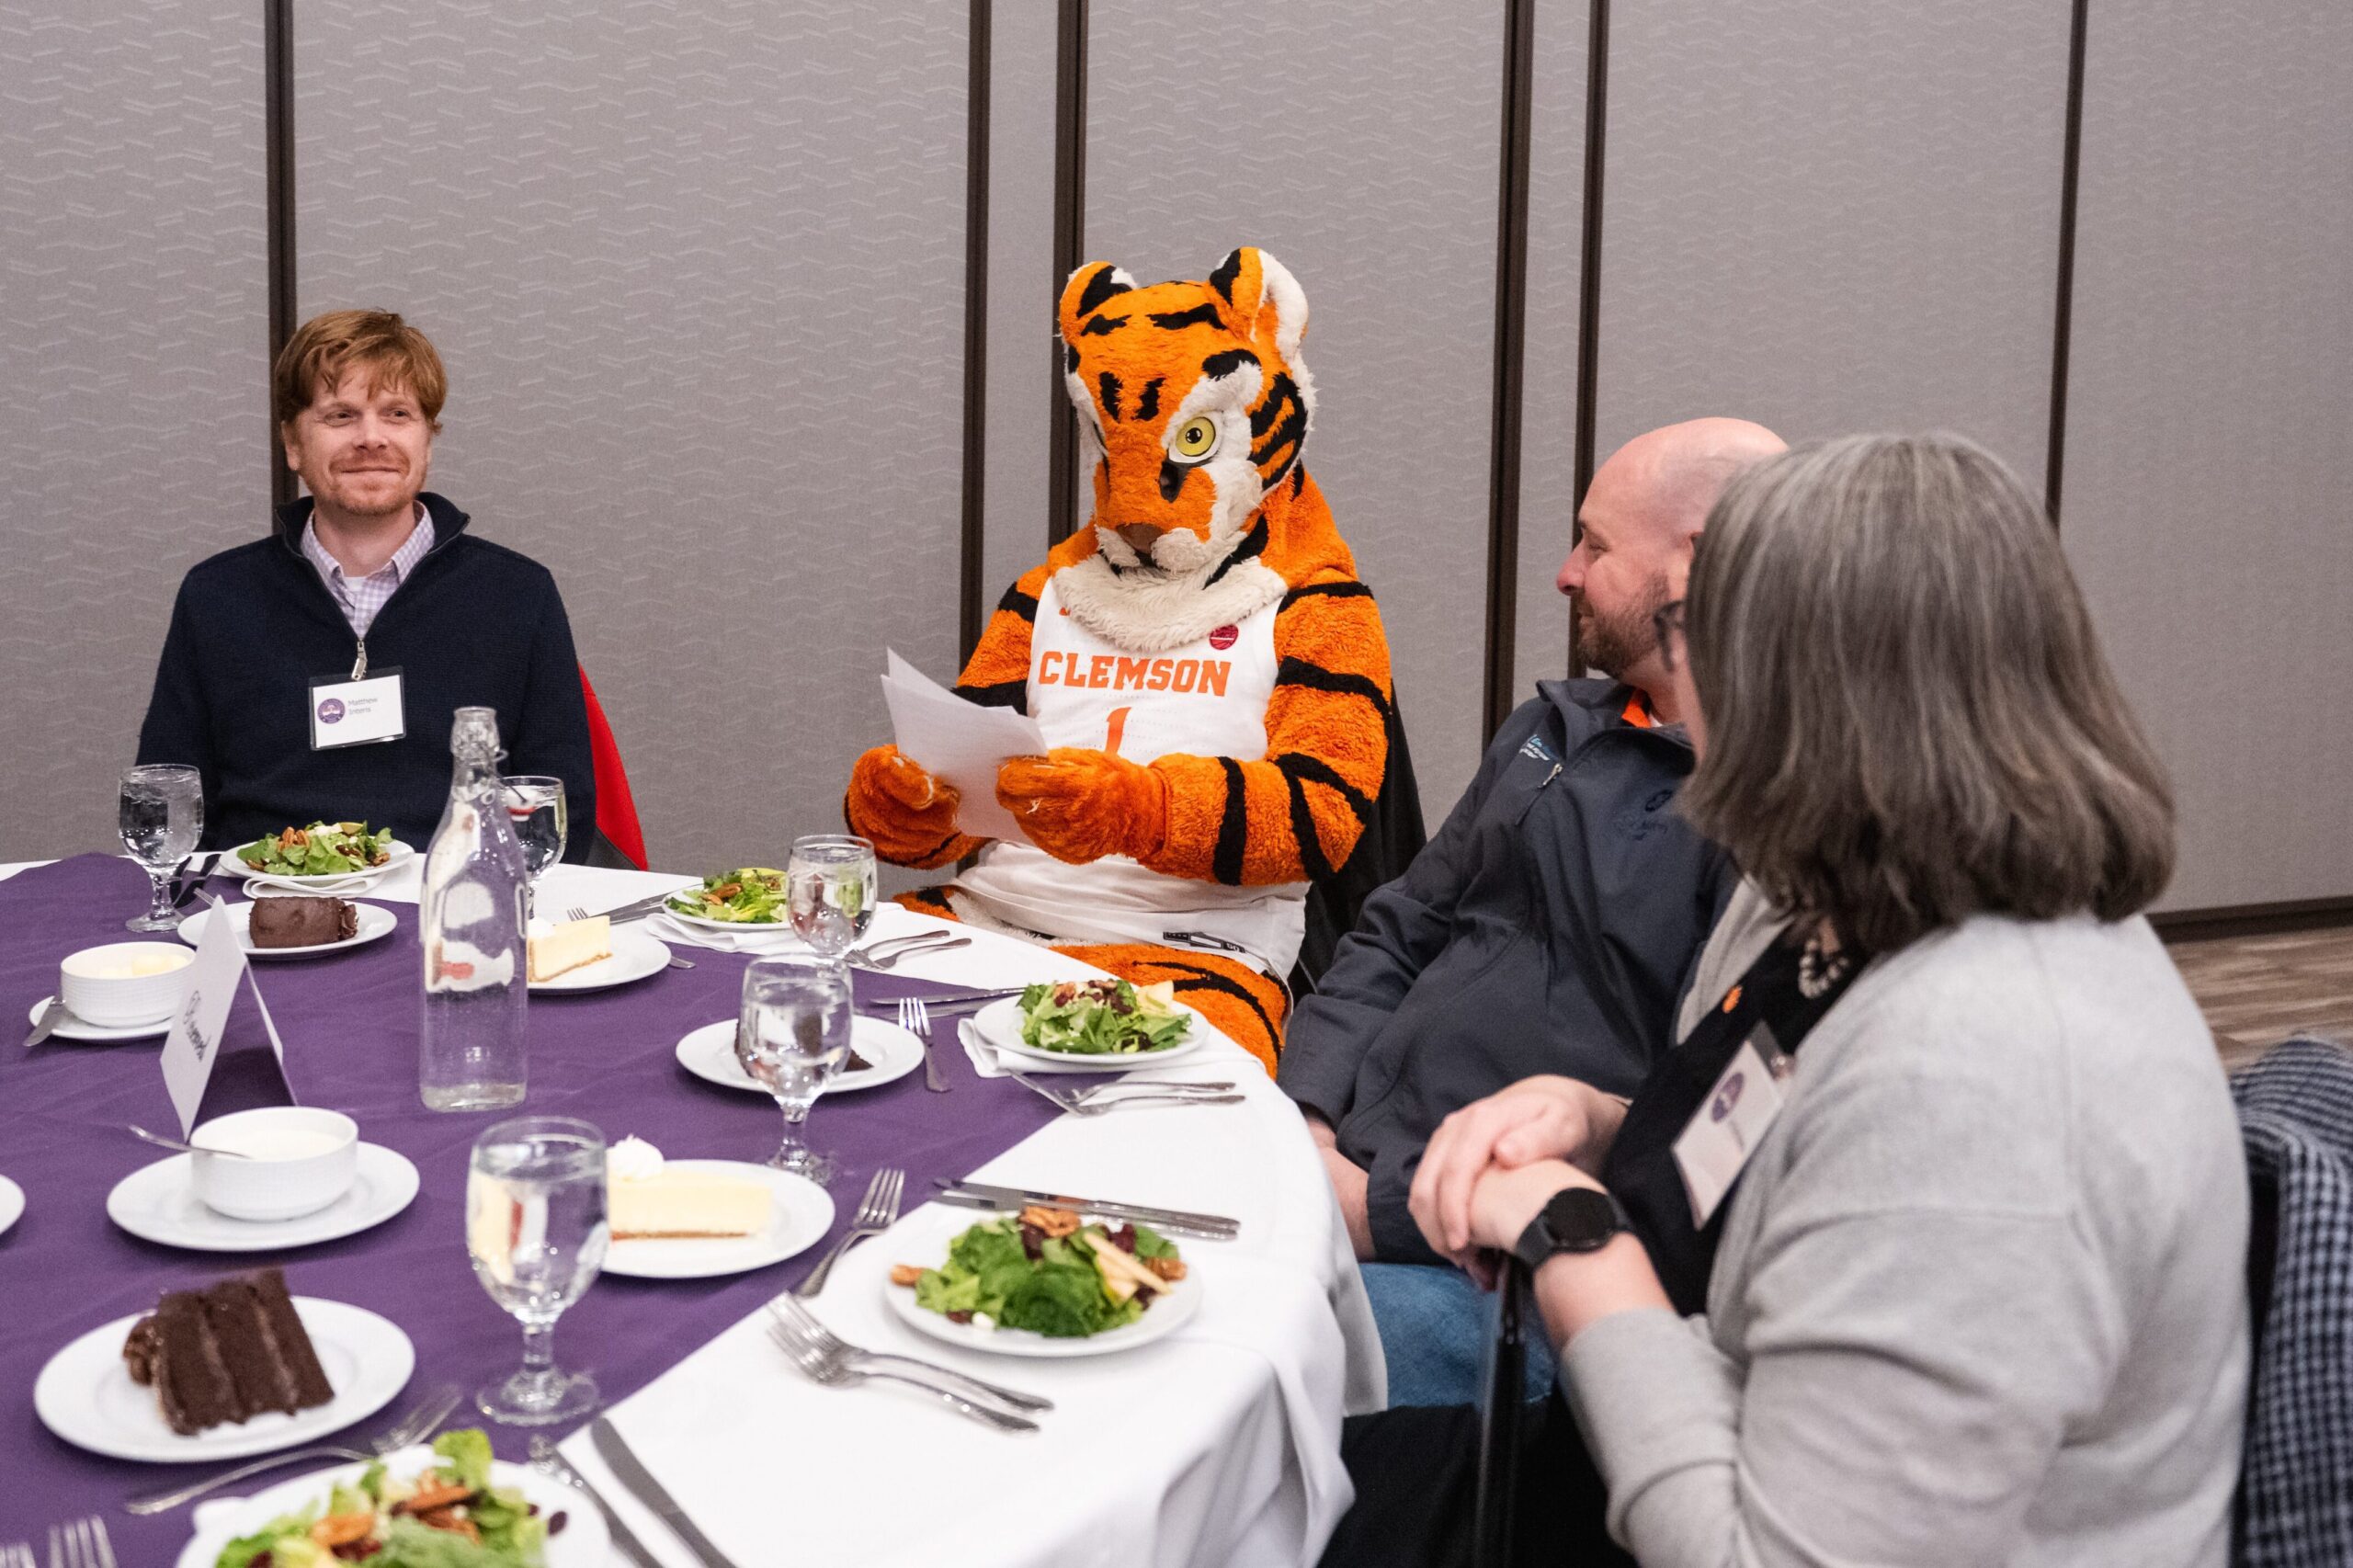 The Clemson Tiger mascot sits at a lunch table surrounded by employees.